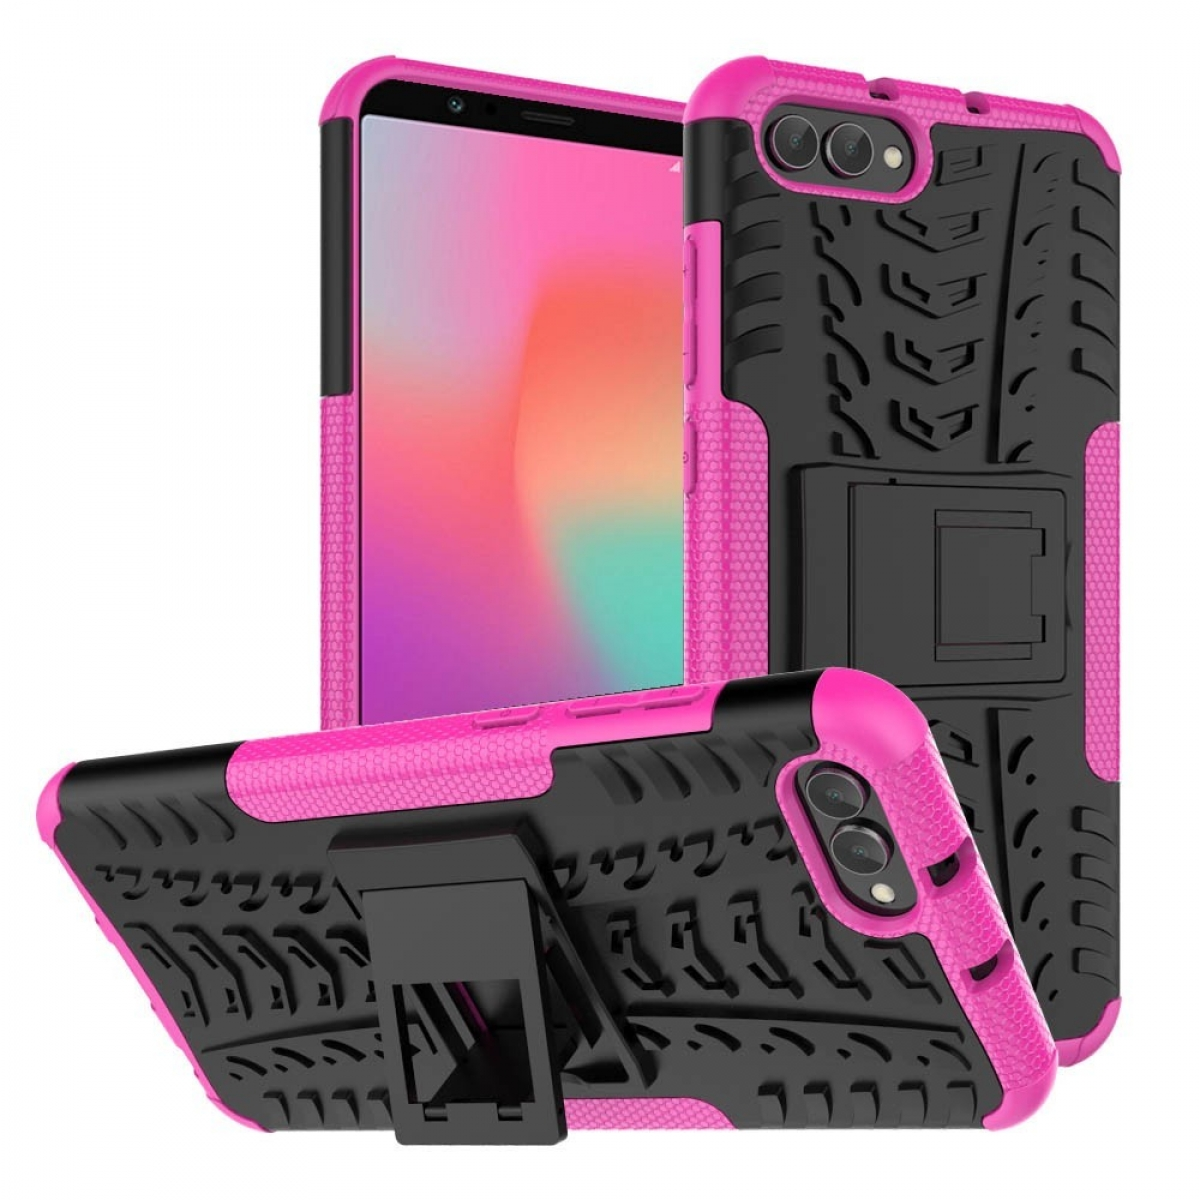 CASEONLINE Backcover, View Honor Huawei, Pink 2i1, 10,